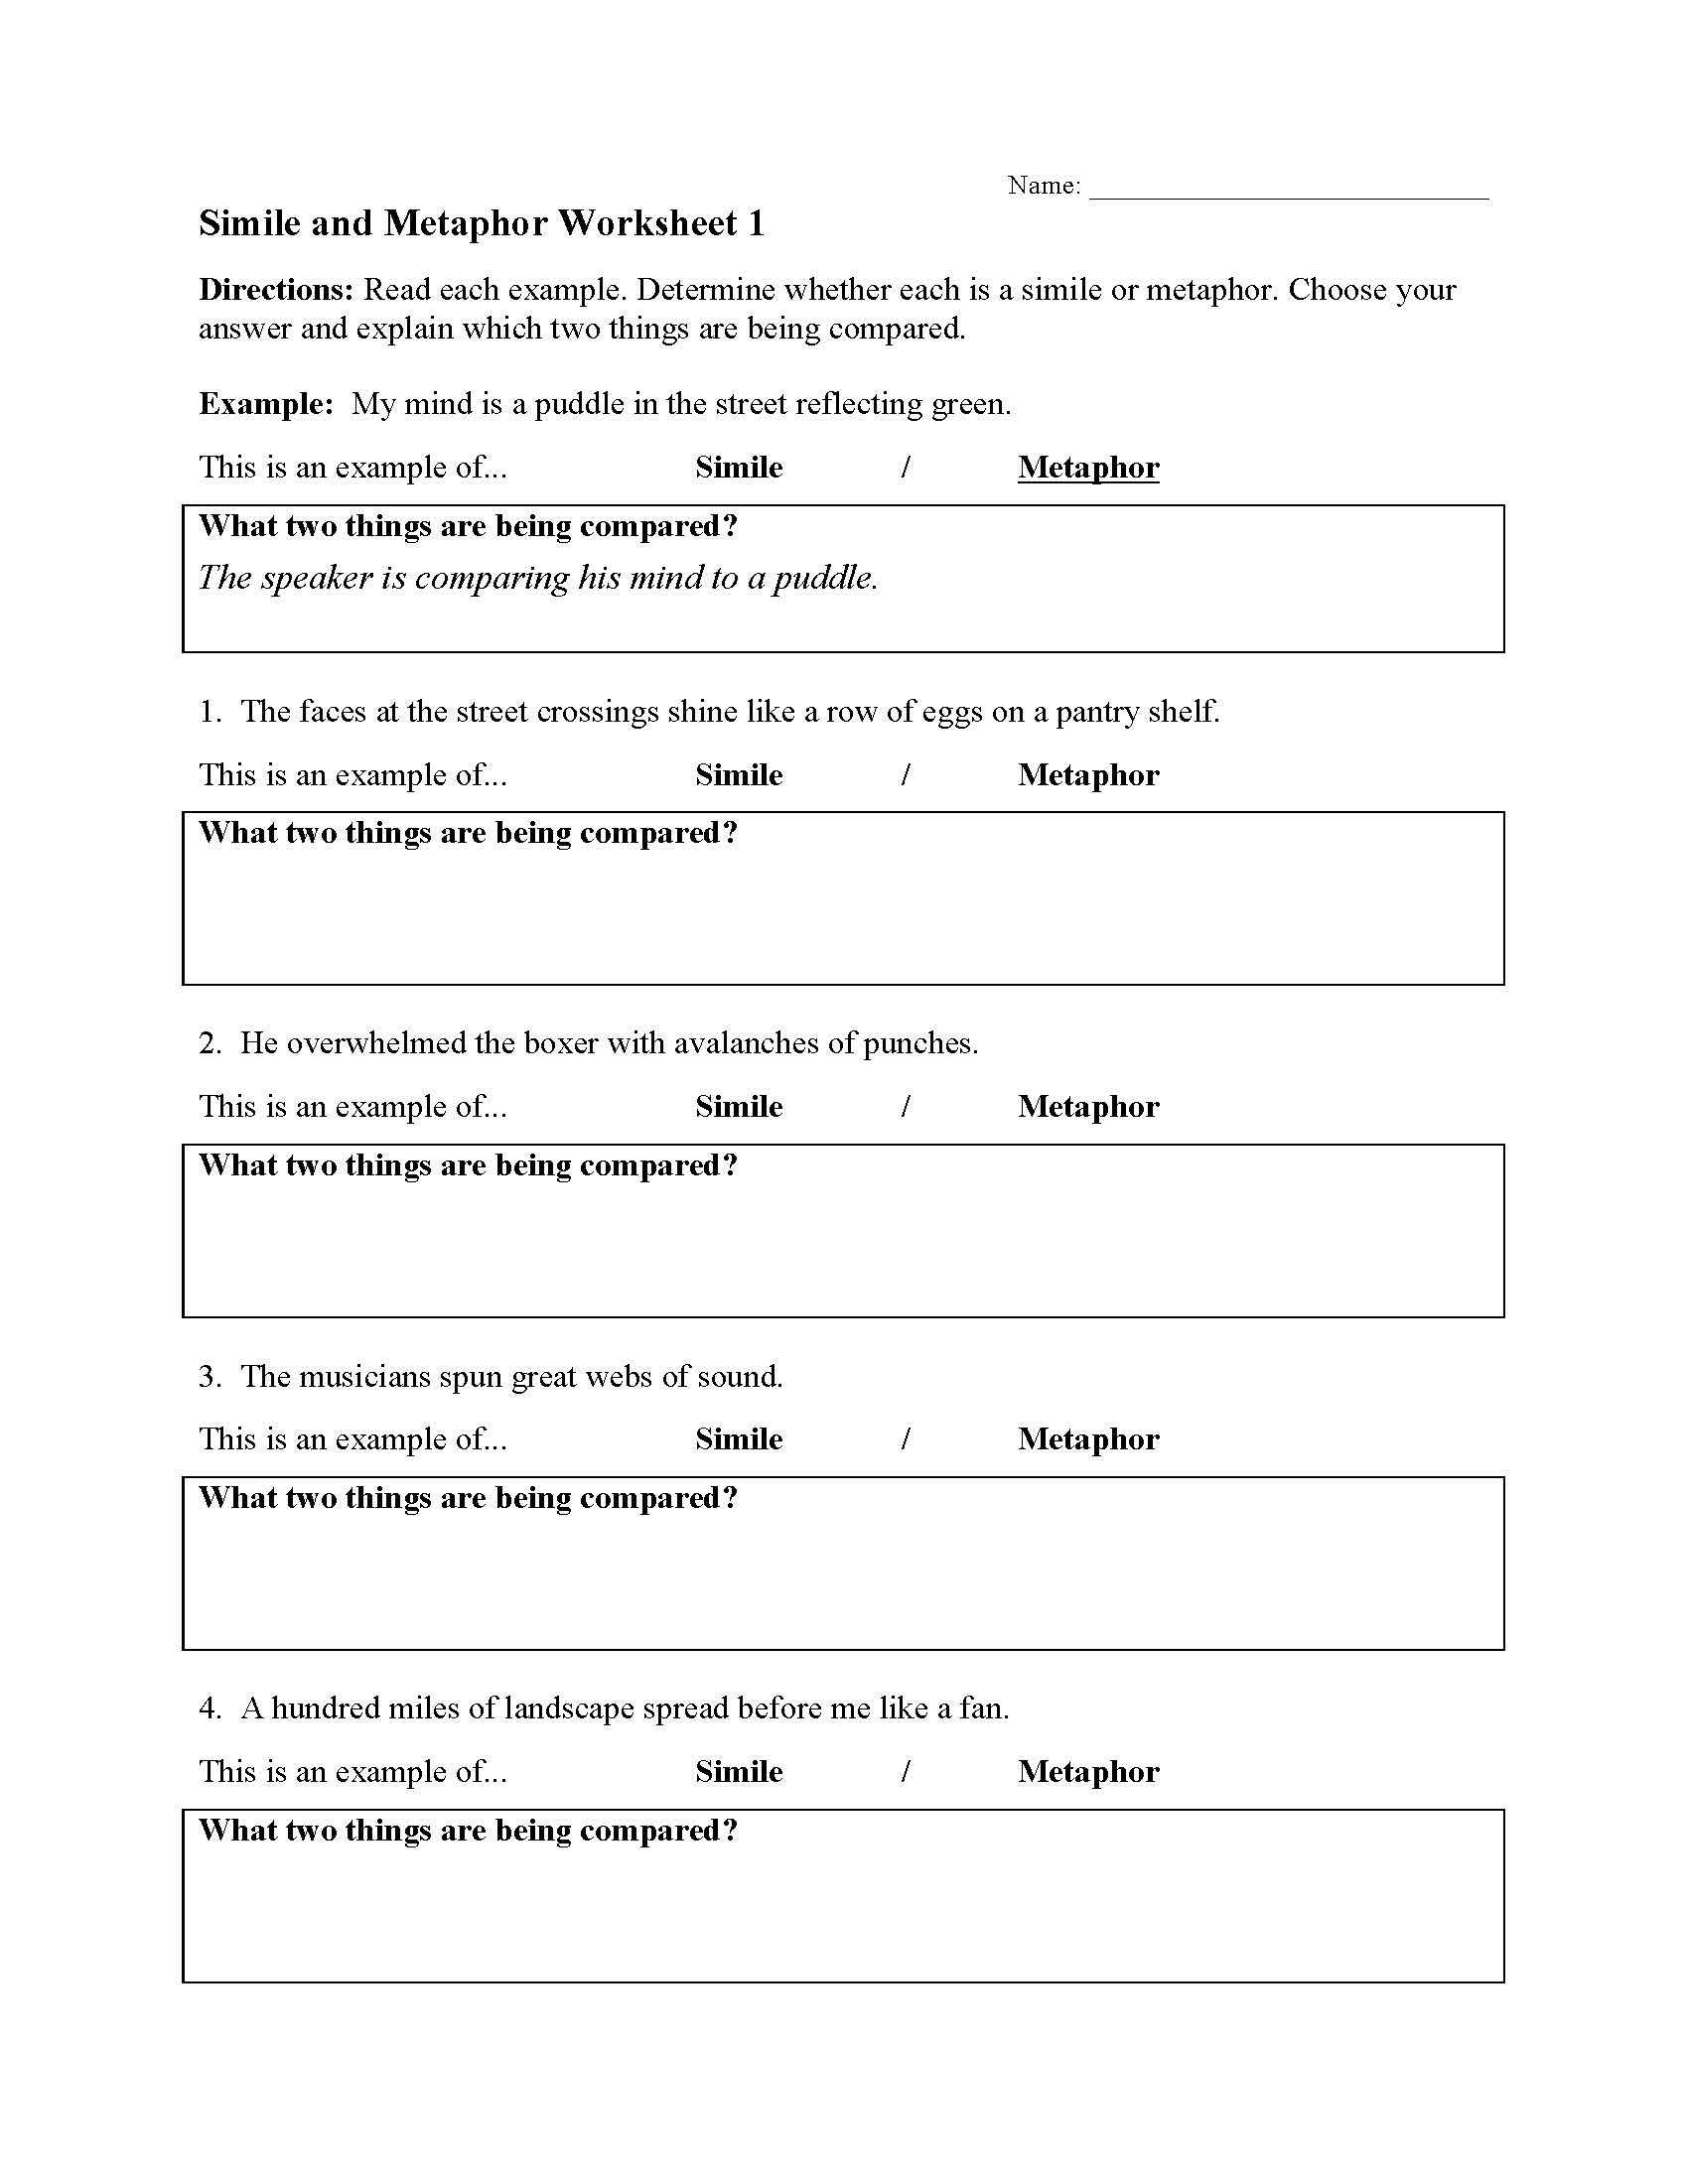 Simile and Metaphor Worksheets   Ereading Worksheets With Regard To Simile And Metaphor Worksheet